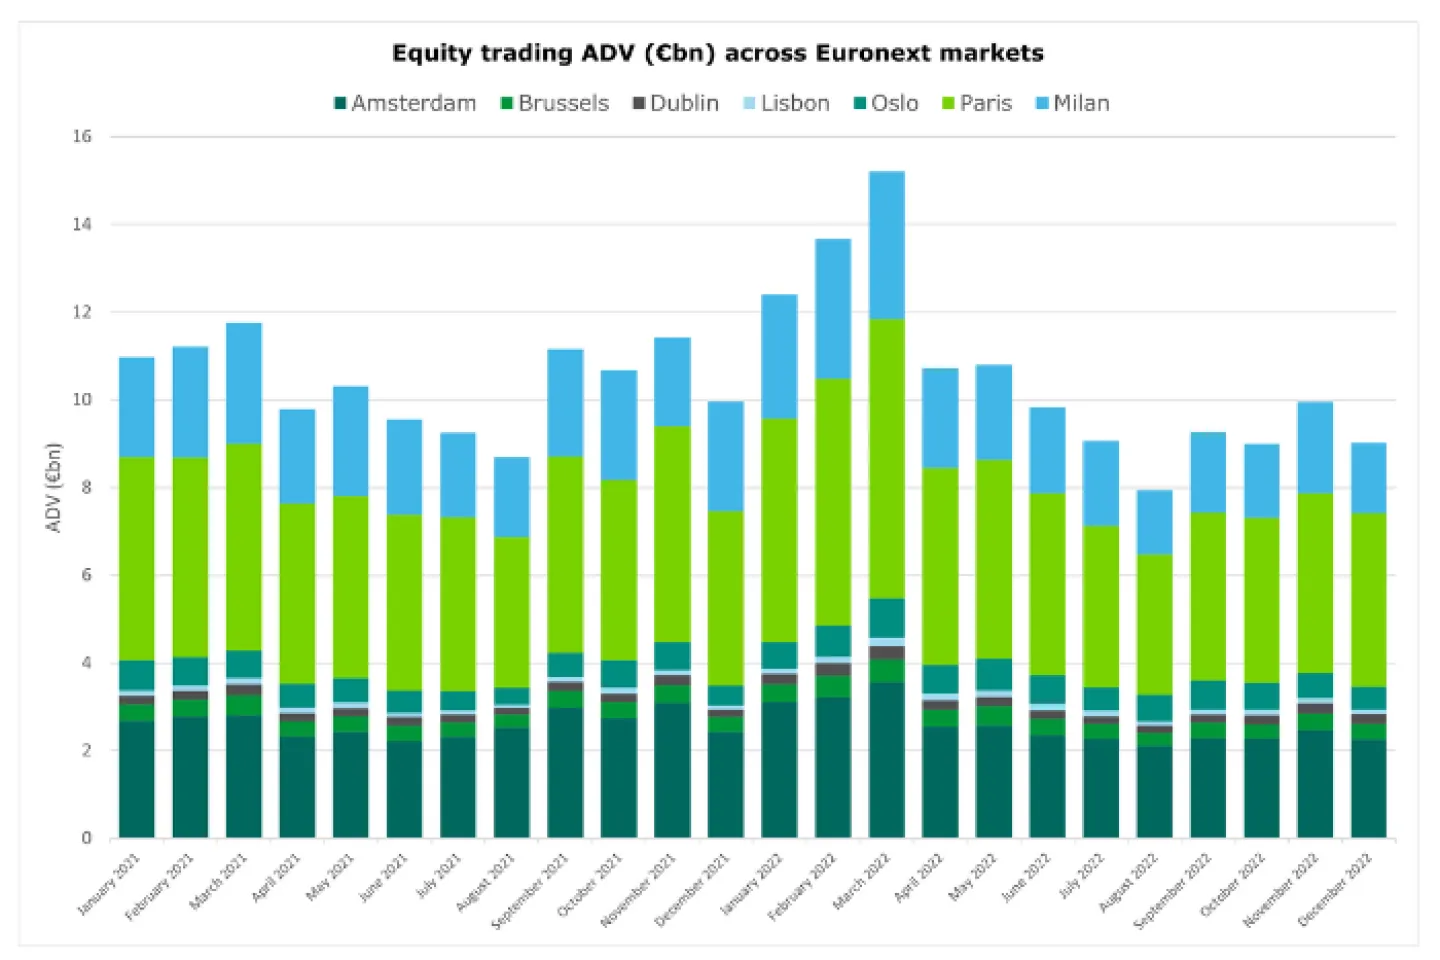 Euronext Equity trading ADV (€bn) per marketplace